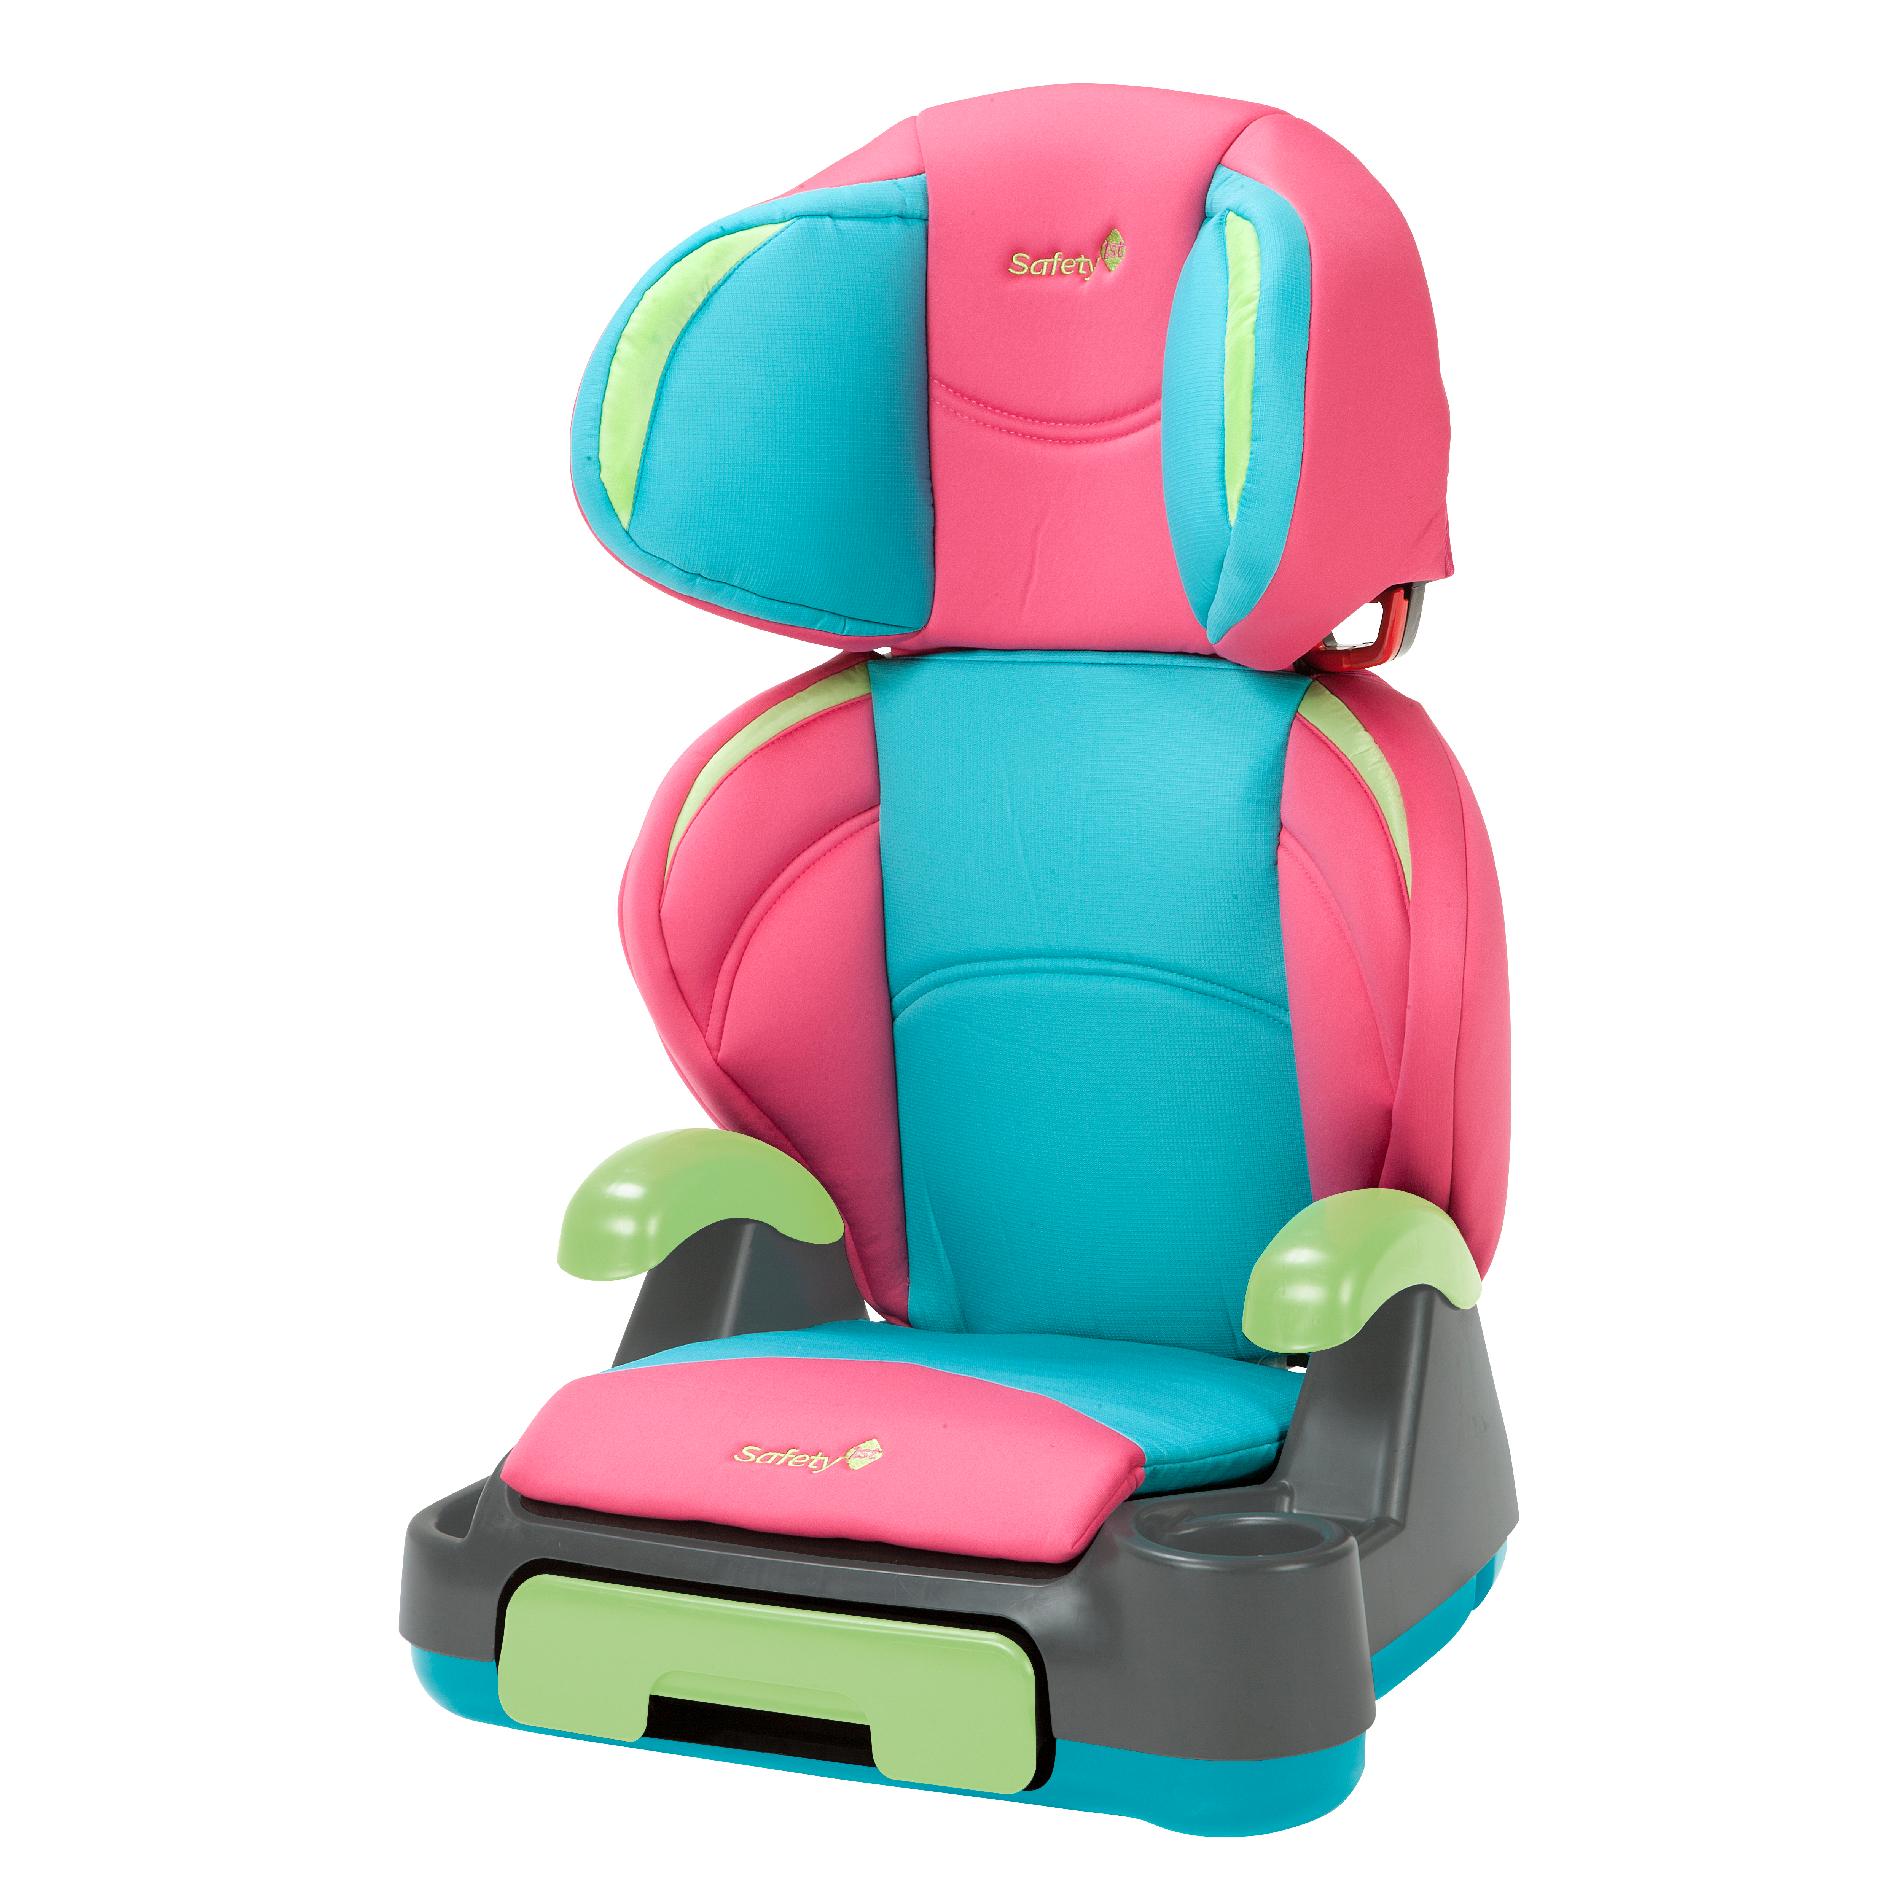 Safety 1st Store 'n Go Belt-Positioning Booster Car Seat - Fruit Punch